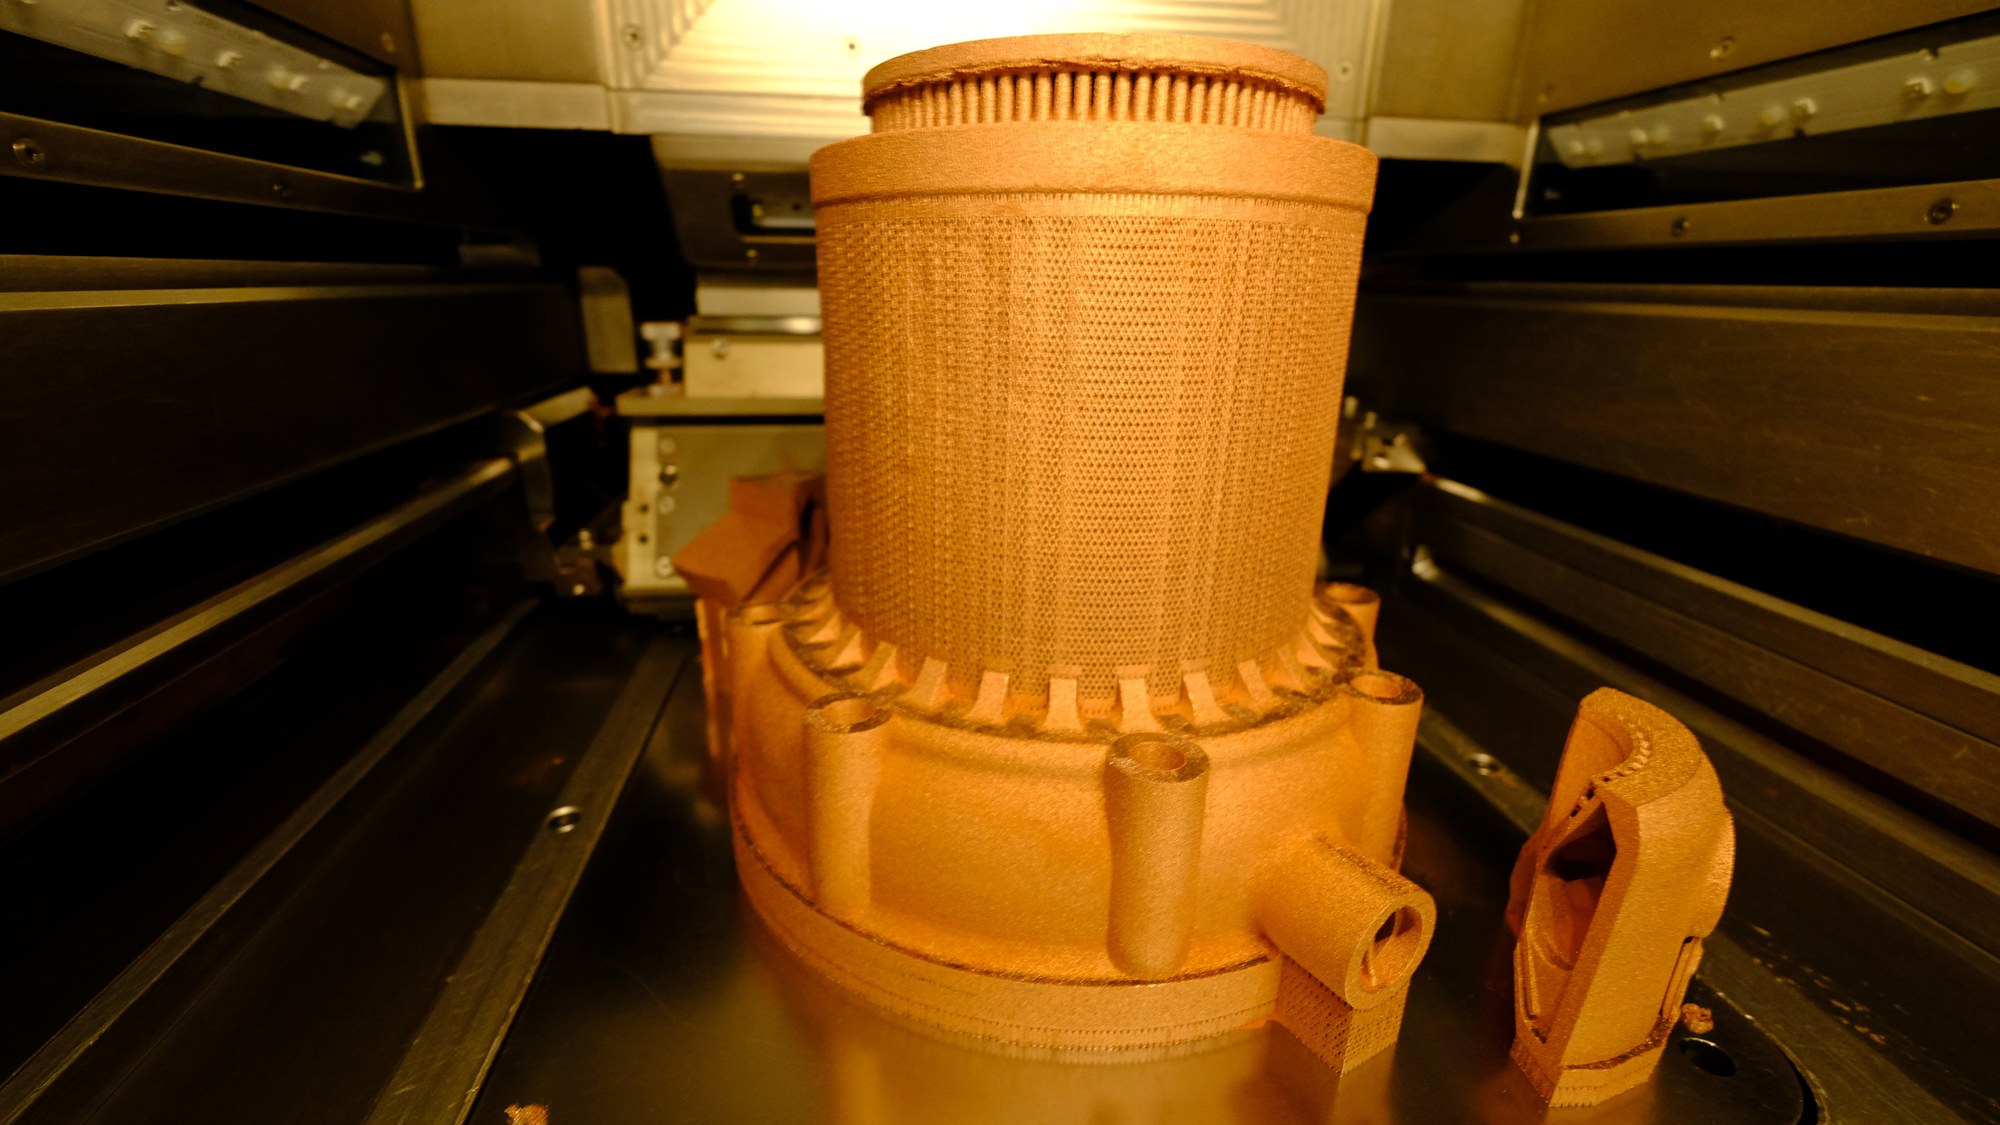 Insight into the development process of the 3D-printed combustion chamber